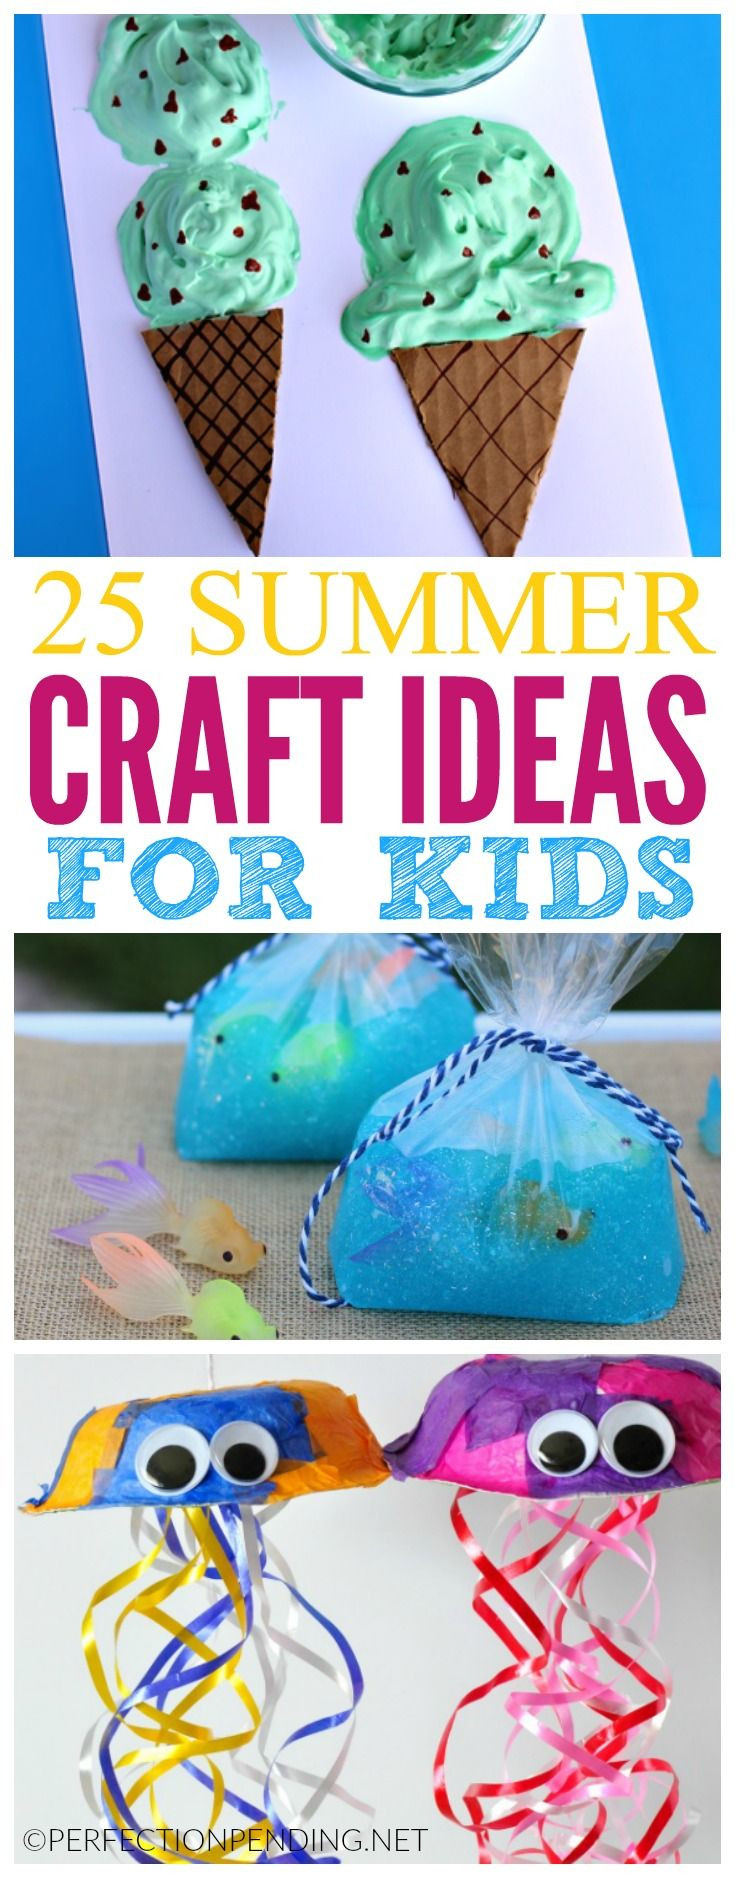 Summer Projects Ideas
 25 Summer Crafts For Kids